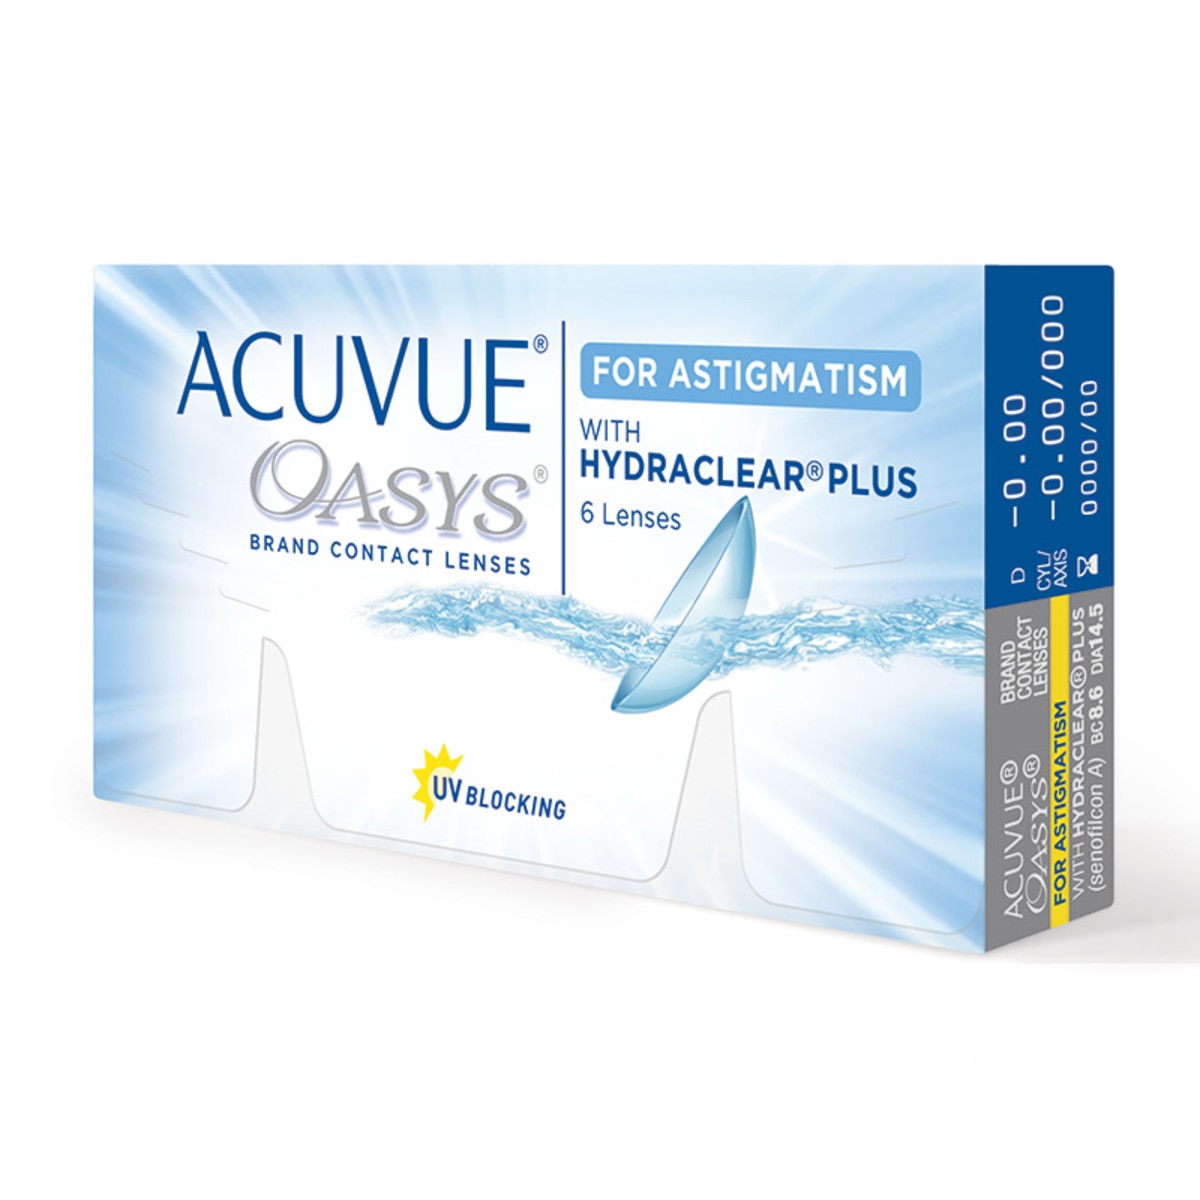 ACUVUE OASYS® con HYDRACLEAR Plus® para Astigmatismo (D -1.25, Cyl/Axis -1.75/100)